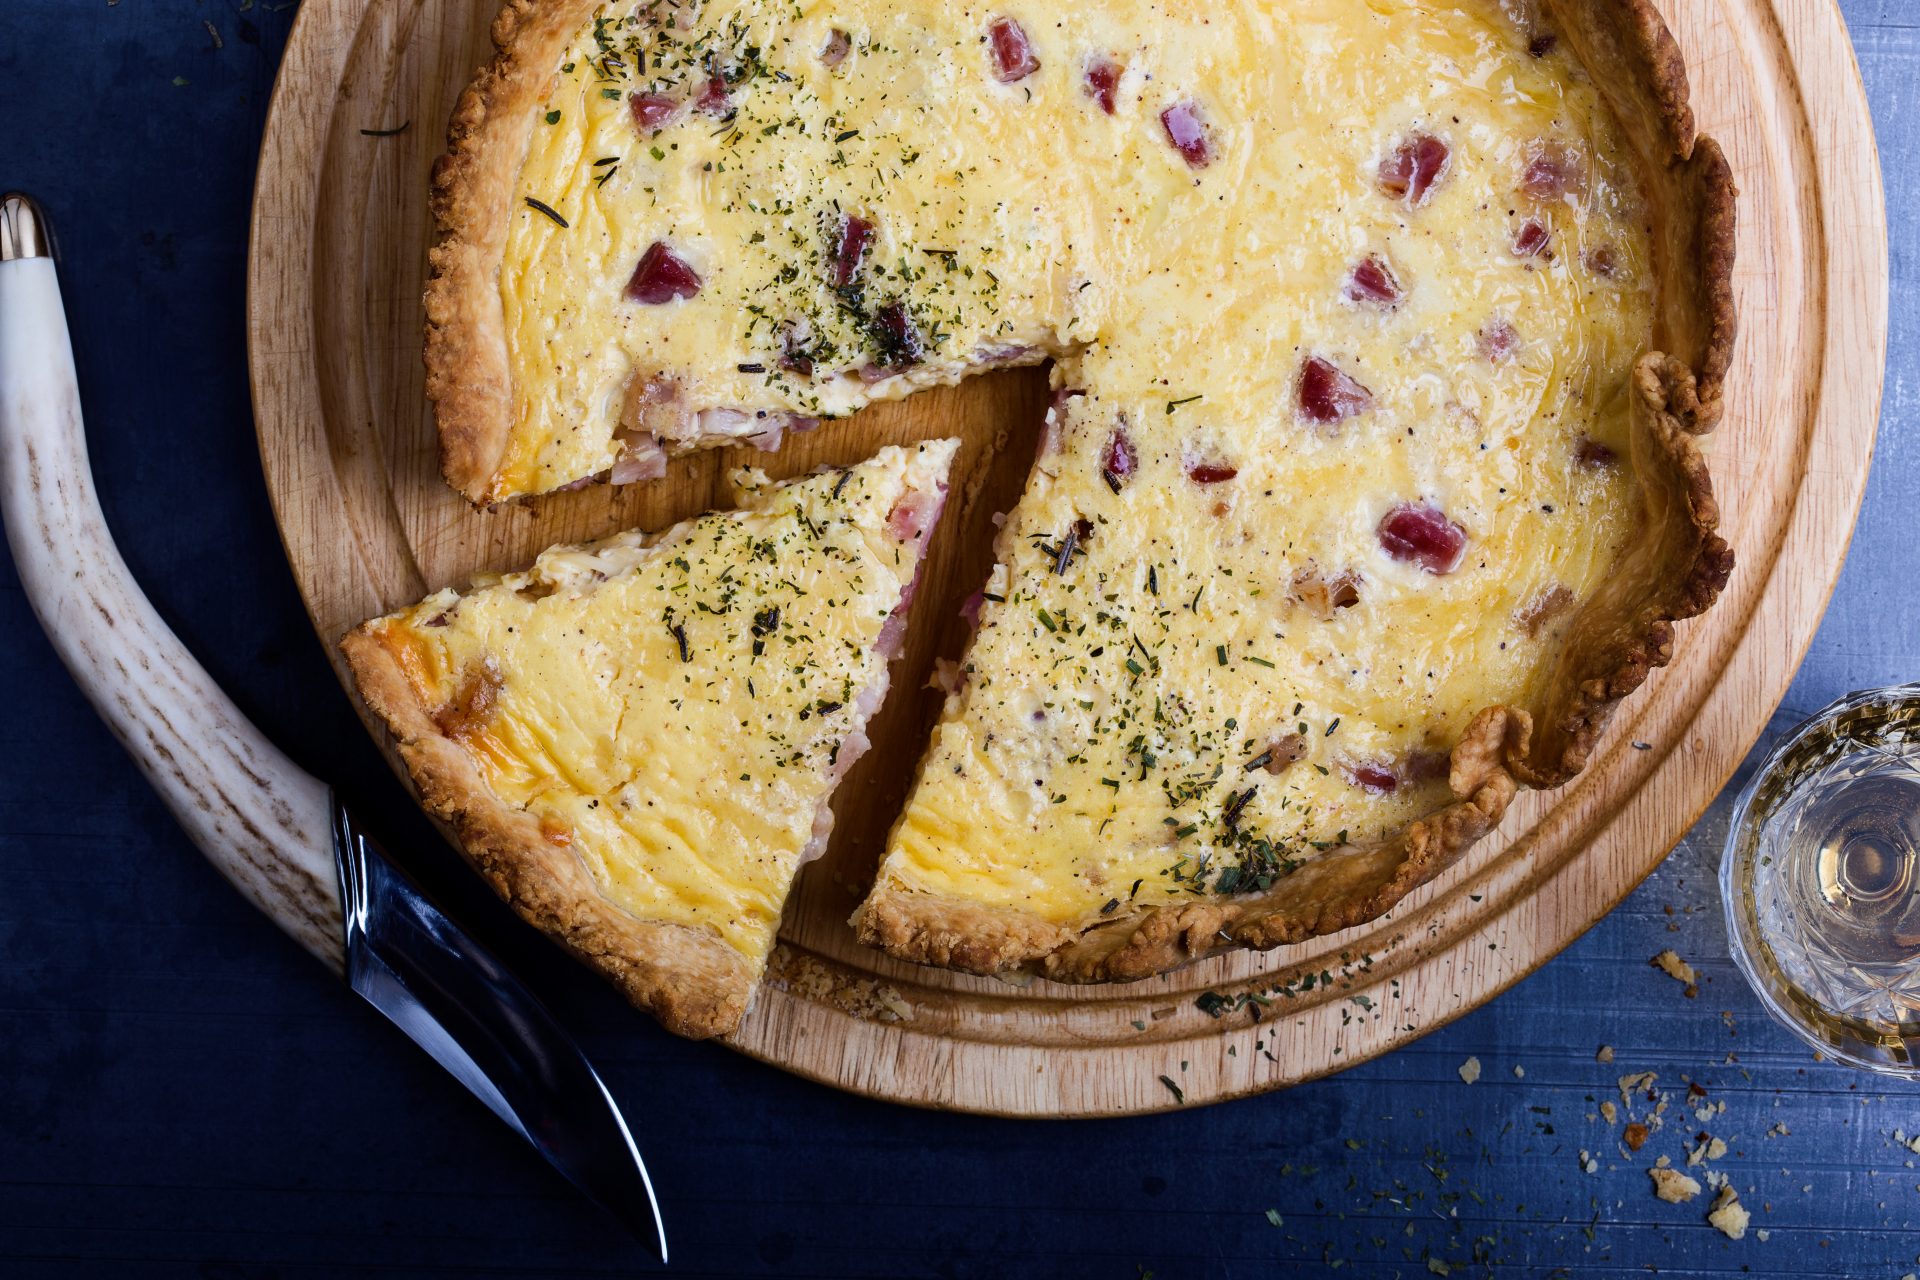 20 recipes for delicious quiches and savory pies